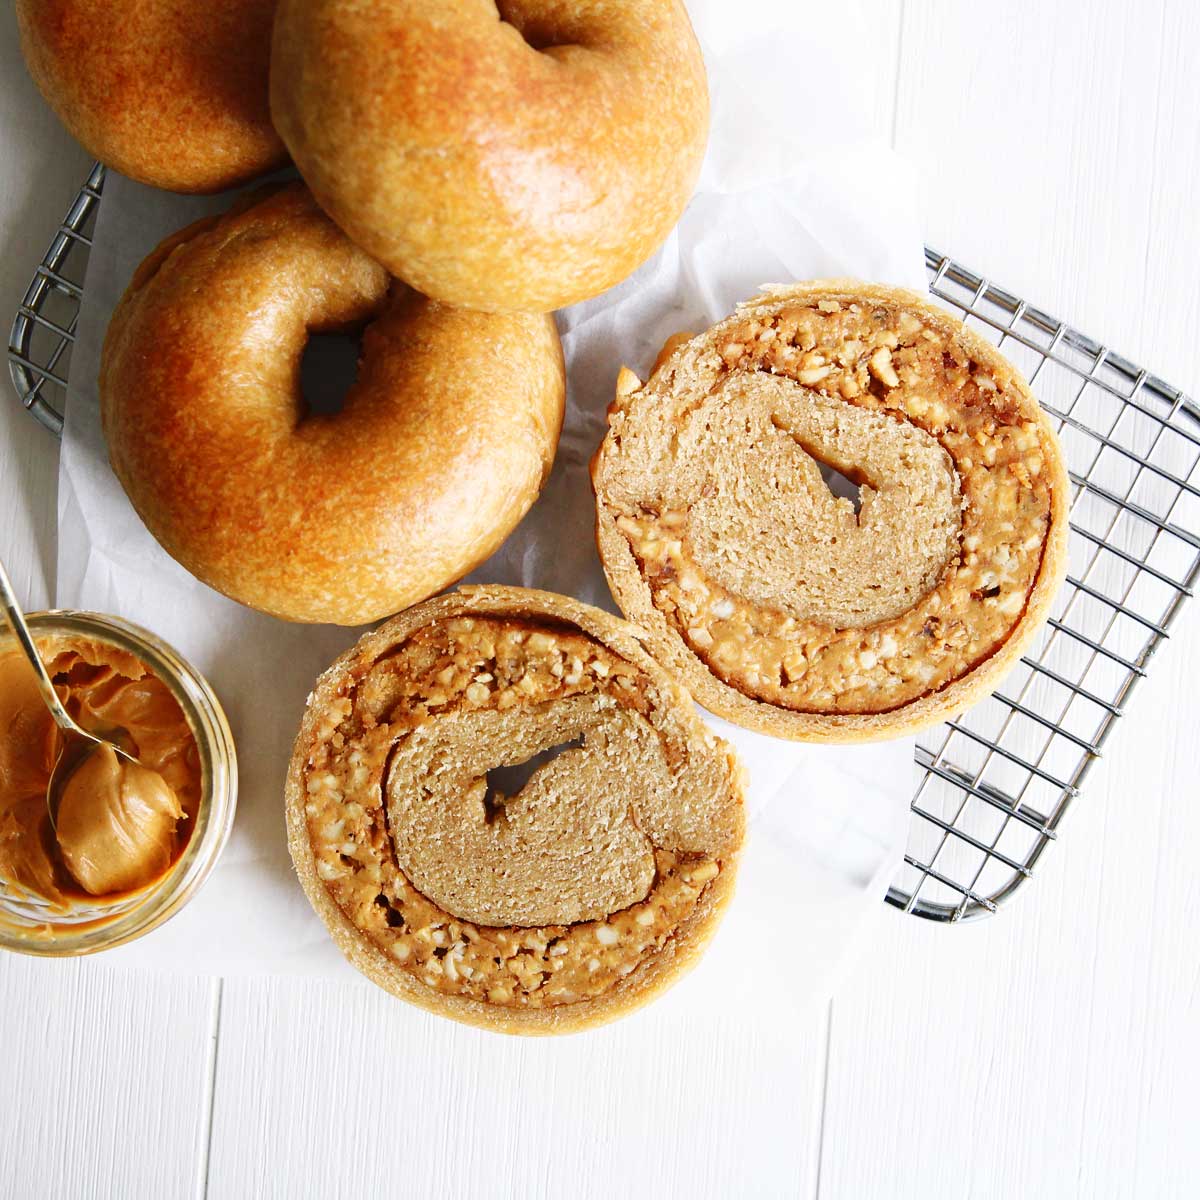 I Stuffed a Bagel With Peanut Butter! High Protein PB Stuffed Bagels Recipe - Peanut Butter Banana Bread